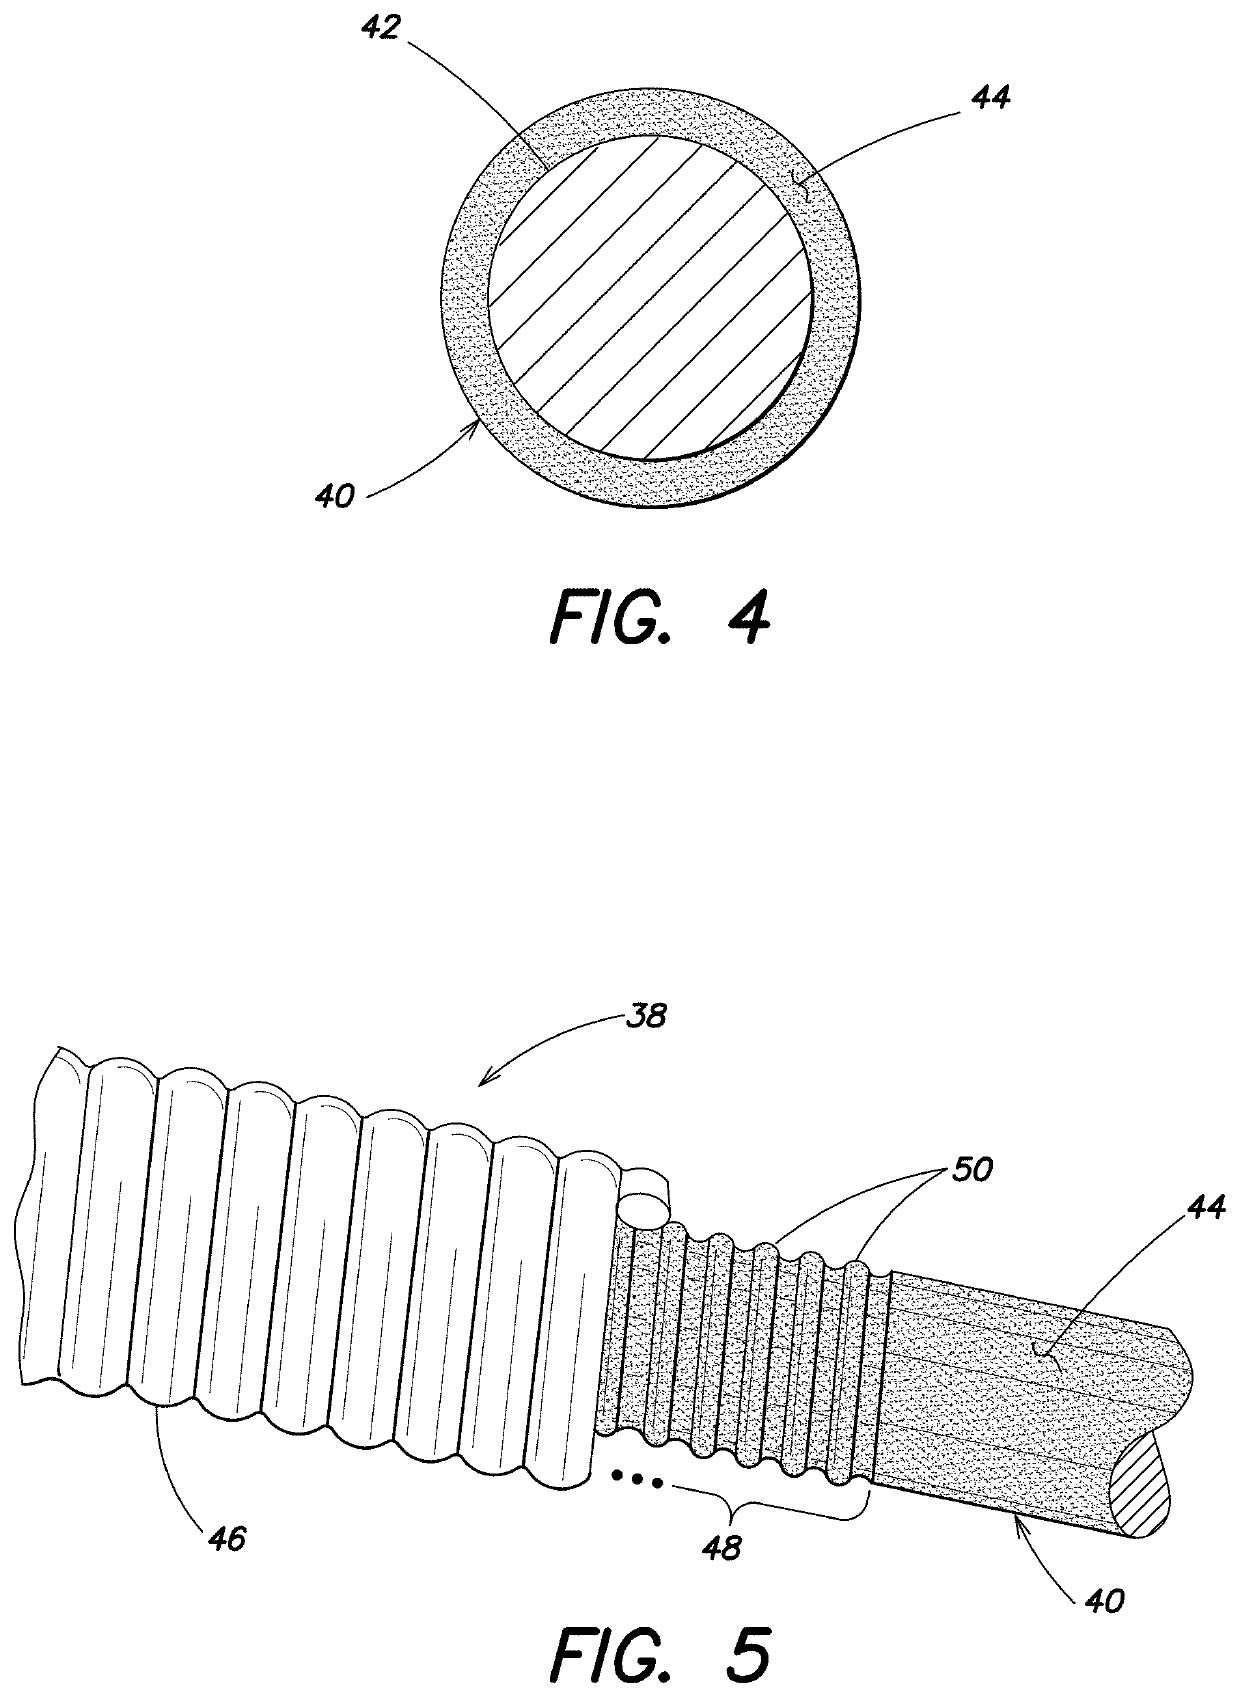 Method for manufacturing musical instrument strings